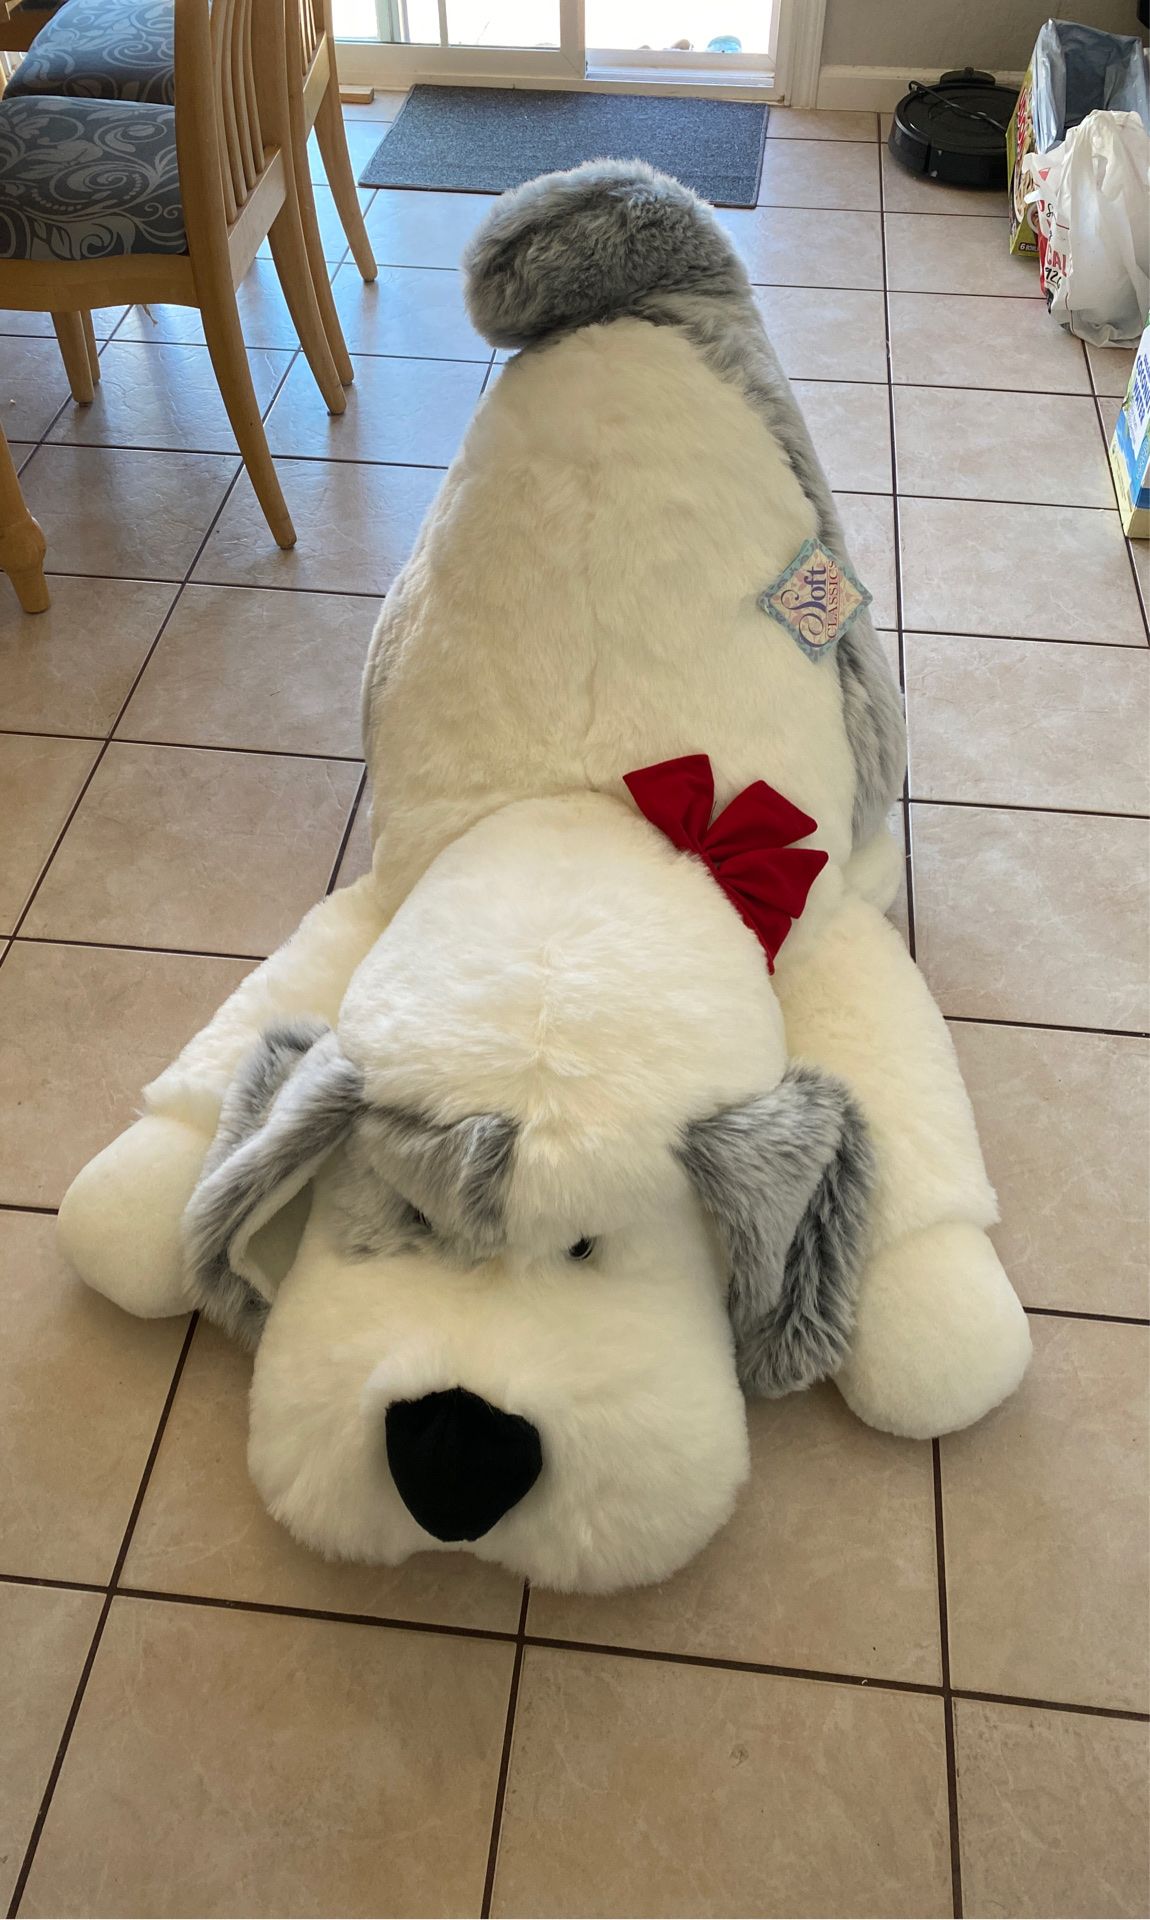 Huge stuffed animal toy dog about 4ft x 2ft